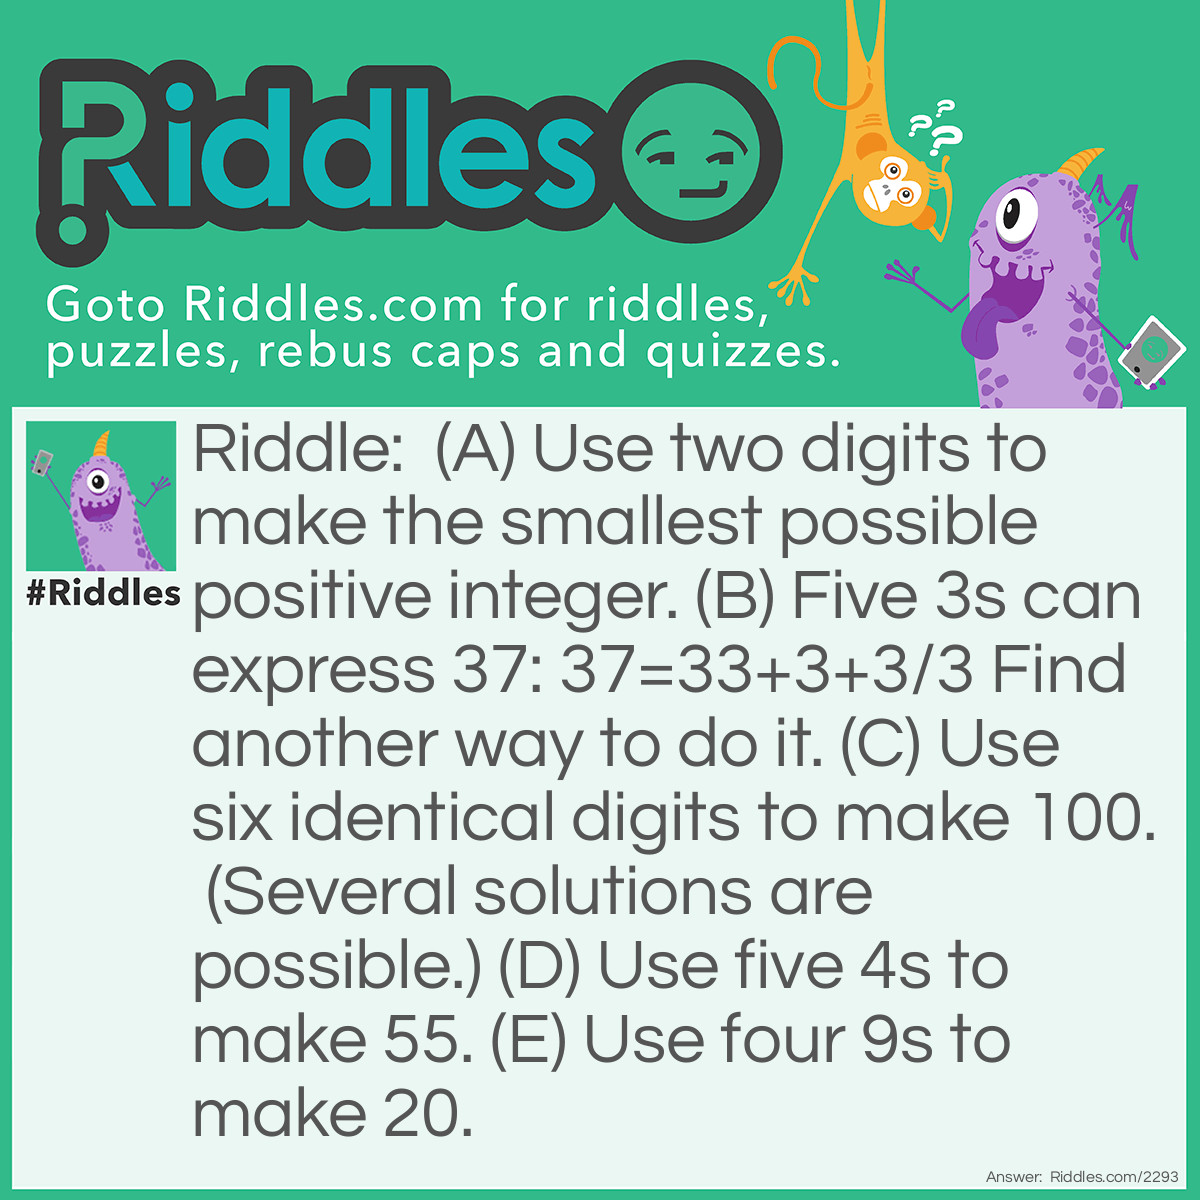 Riddle: (A) Use two digits to make the smallest possible positive integer. 
(B) Five 3s can express 37: 37=33+3+3/3 
Find another way to do it. 
(C) Use six identical digits to make 100. (Several solutions are possible.) 
(D) Use five 4s to make 55. 
(E) Use four 9s to make 20. Answer: (A) 1 X 1; 1/1;2/2;ect....;1-0;2-1;and many others.
(B) 37=333/3X3; 37=3 X 3 X 3 + 3/.3
(C) 99 + 99/99; 55+55- 5- 5; (666-66)/6
(D) 44 + 44/4=55.
(E) 9 + 99/9=20.